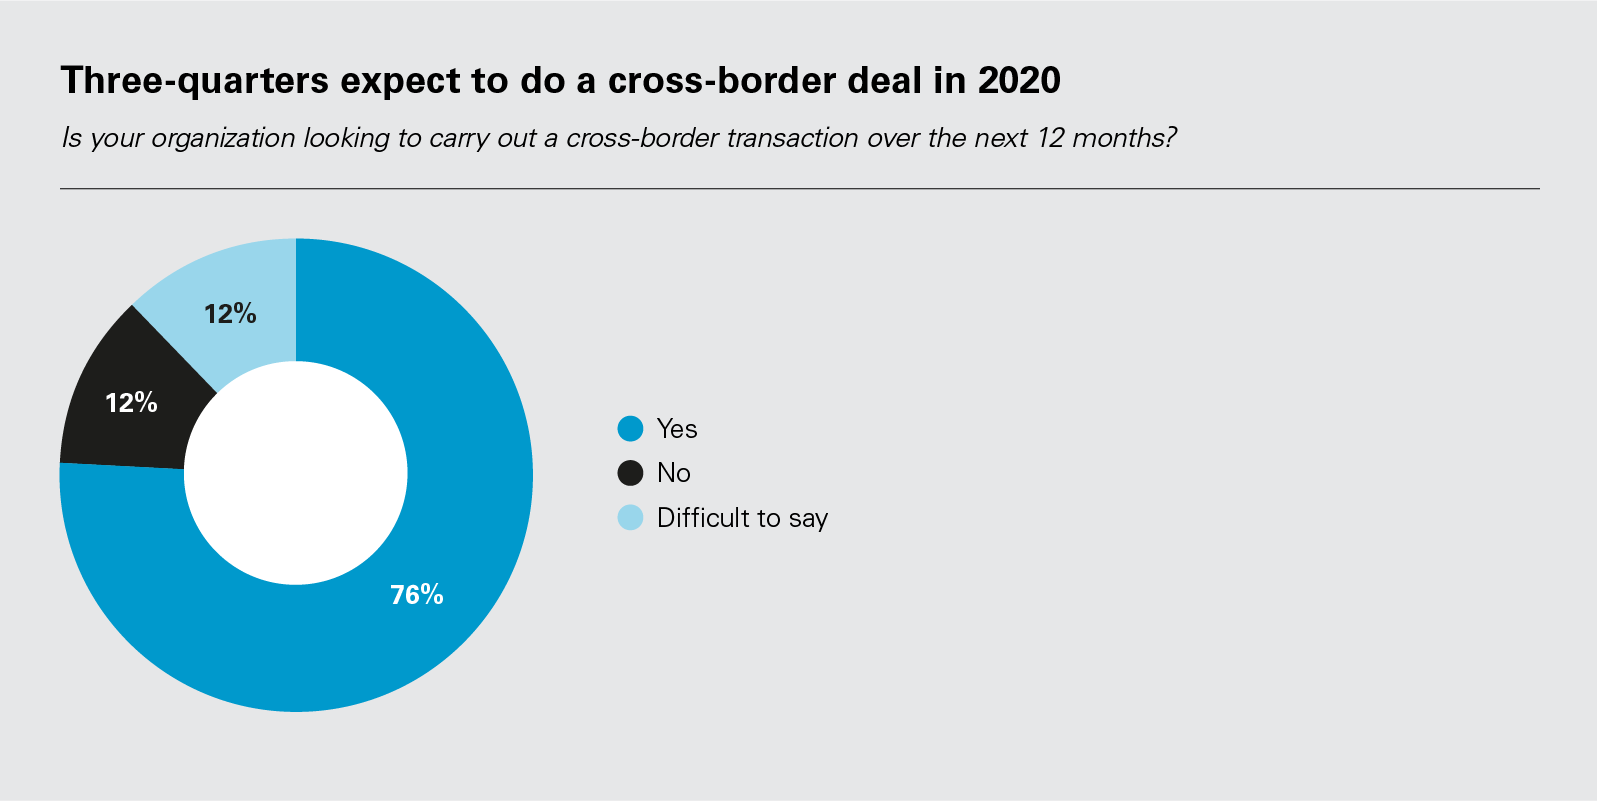 Three-quarters expect to do a cross-border deal in 2020